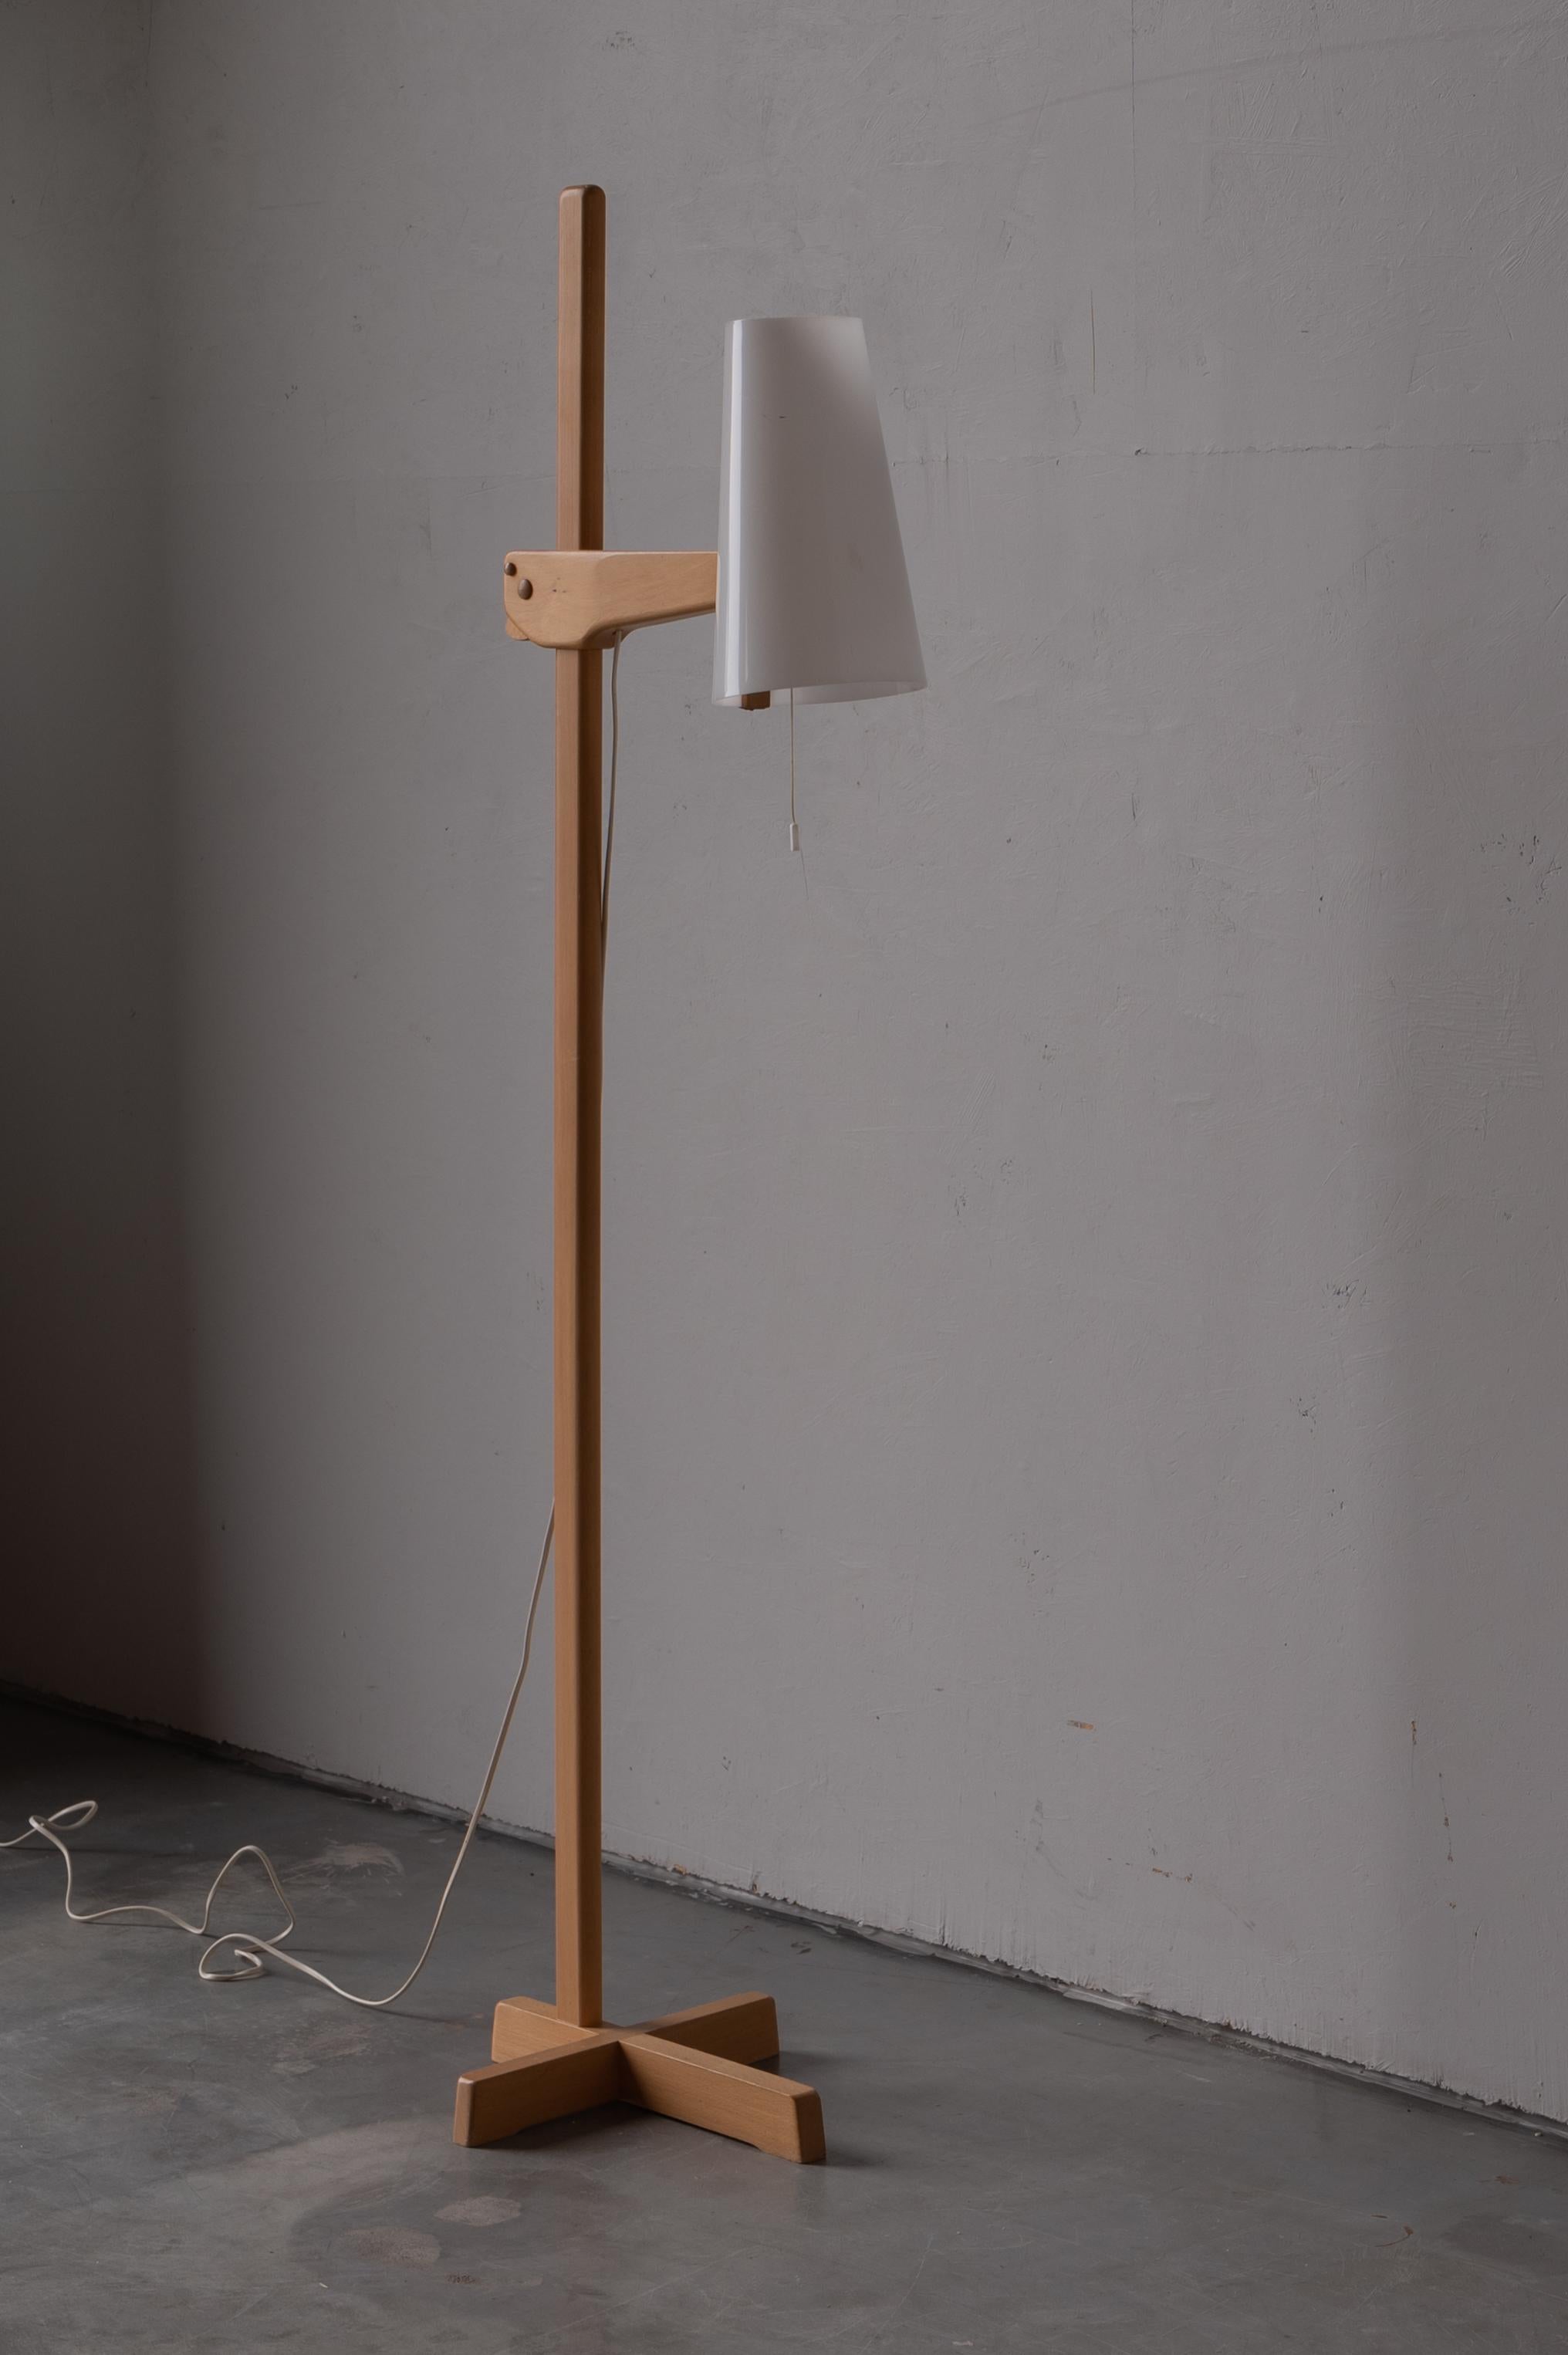 A floor lamp. In solid oak, acrylic lampshade. Designed and produced in Sweden, 1960s.

Other designers of the period include Hans Bergström, Hans-Agne Jacobson, Alvar Aalto, Josef Frank, and Paavo Tynell.